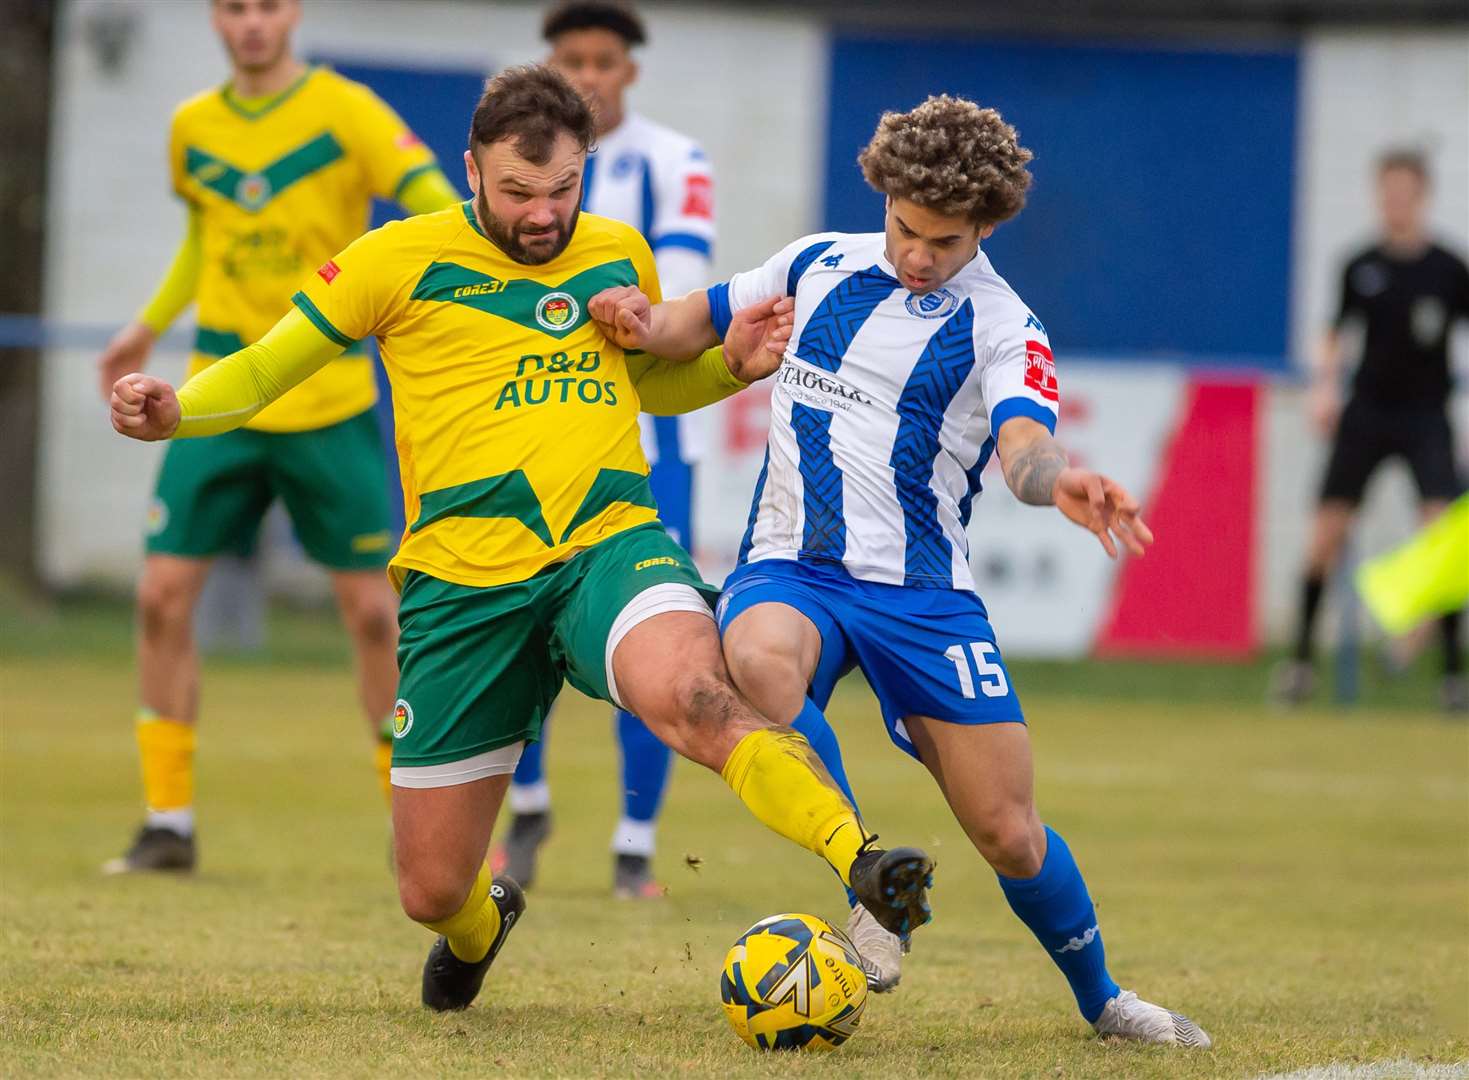 Gary Lockyer battles for the ball during Ashford's weekend win at Haywards Heath. Picture: Ian Scammell